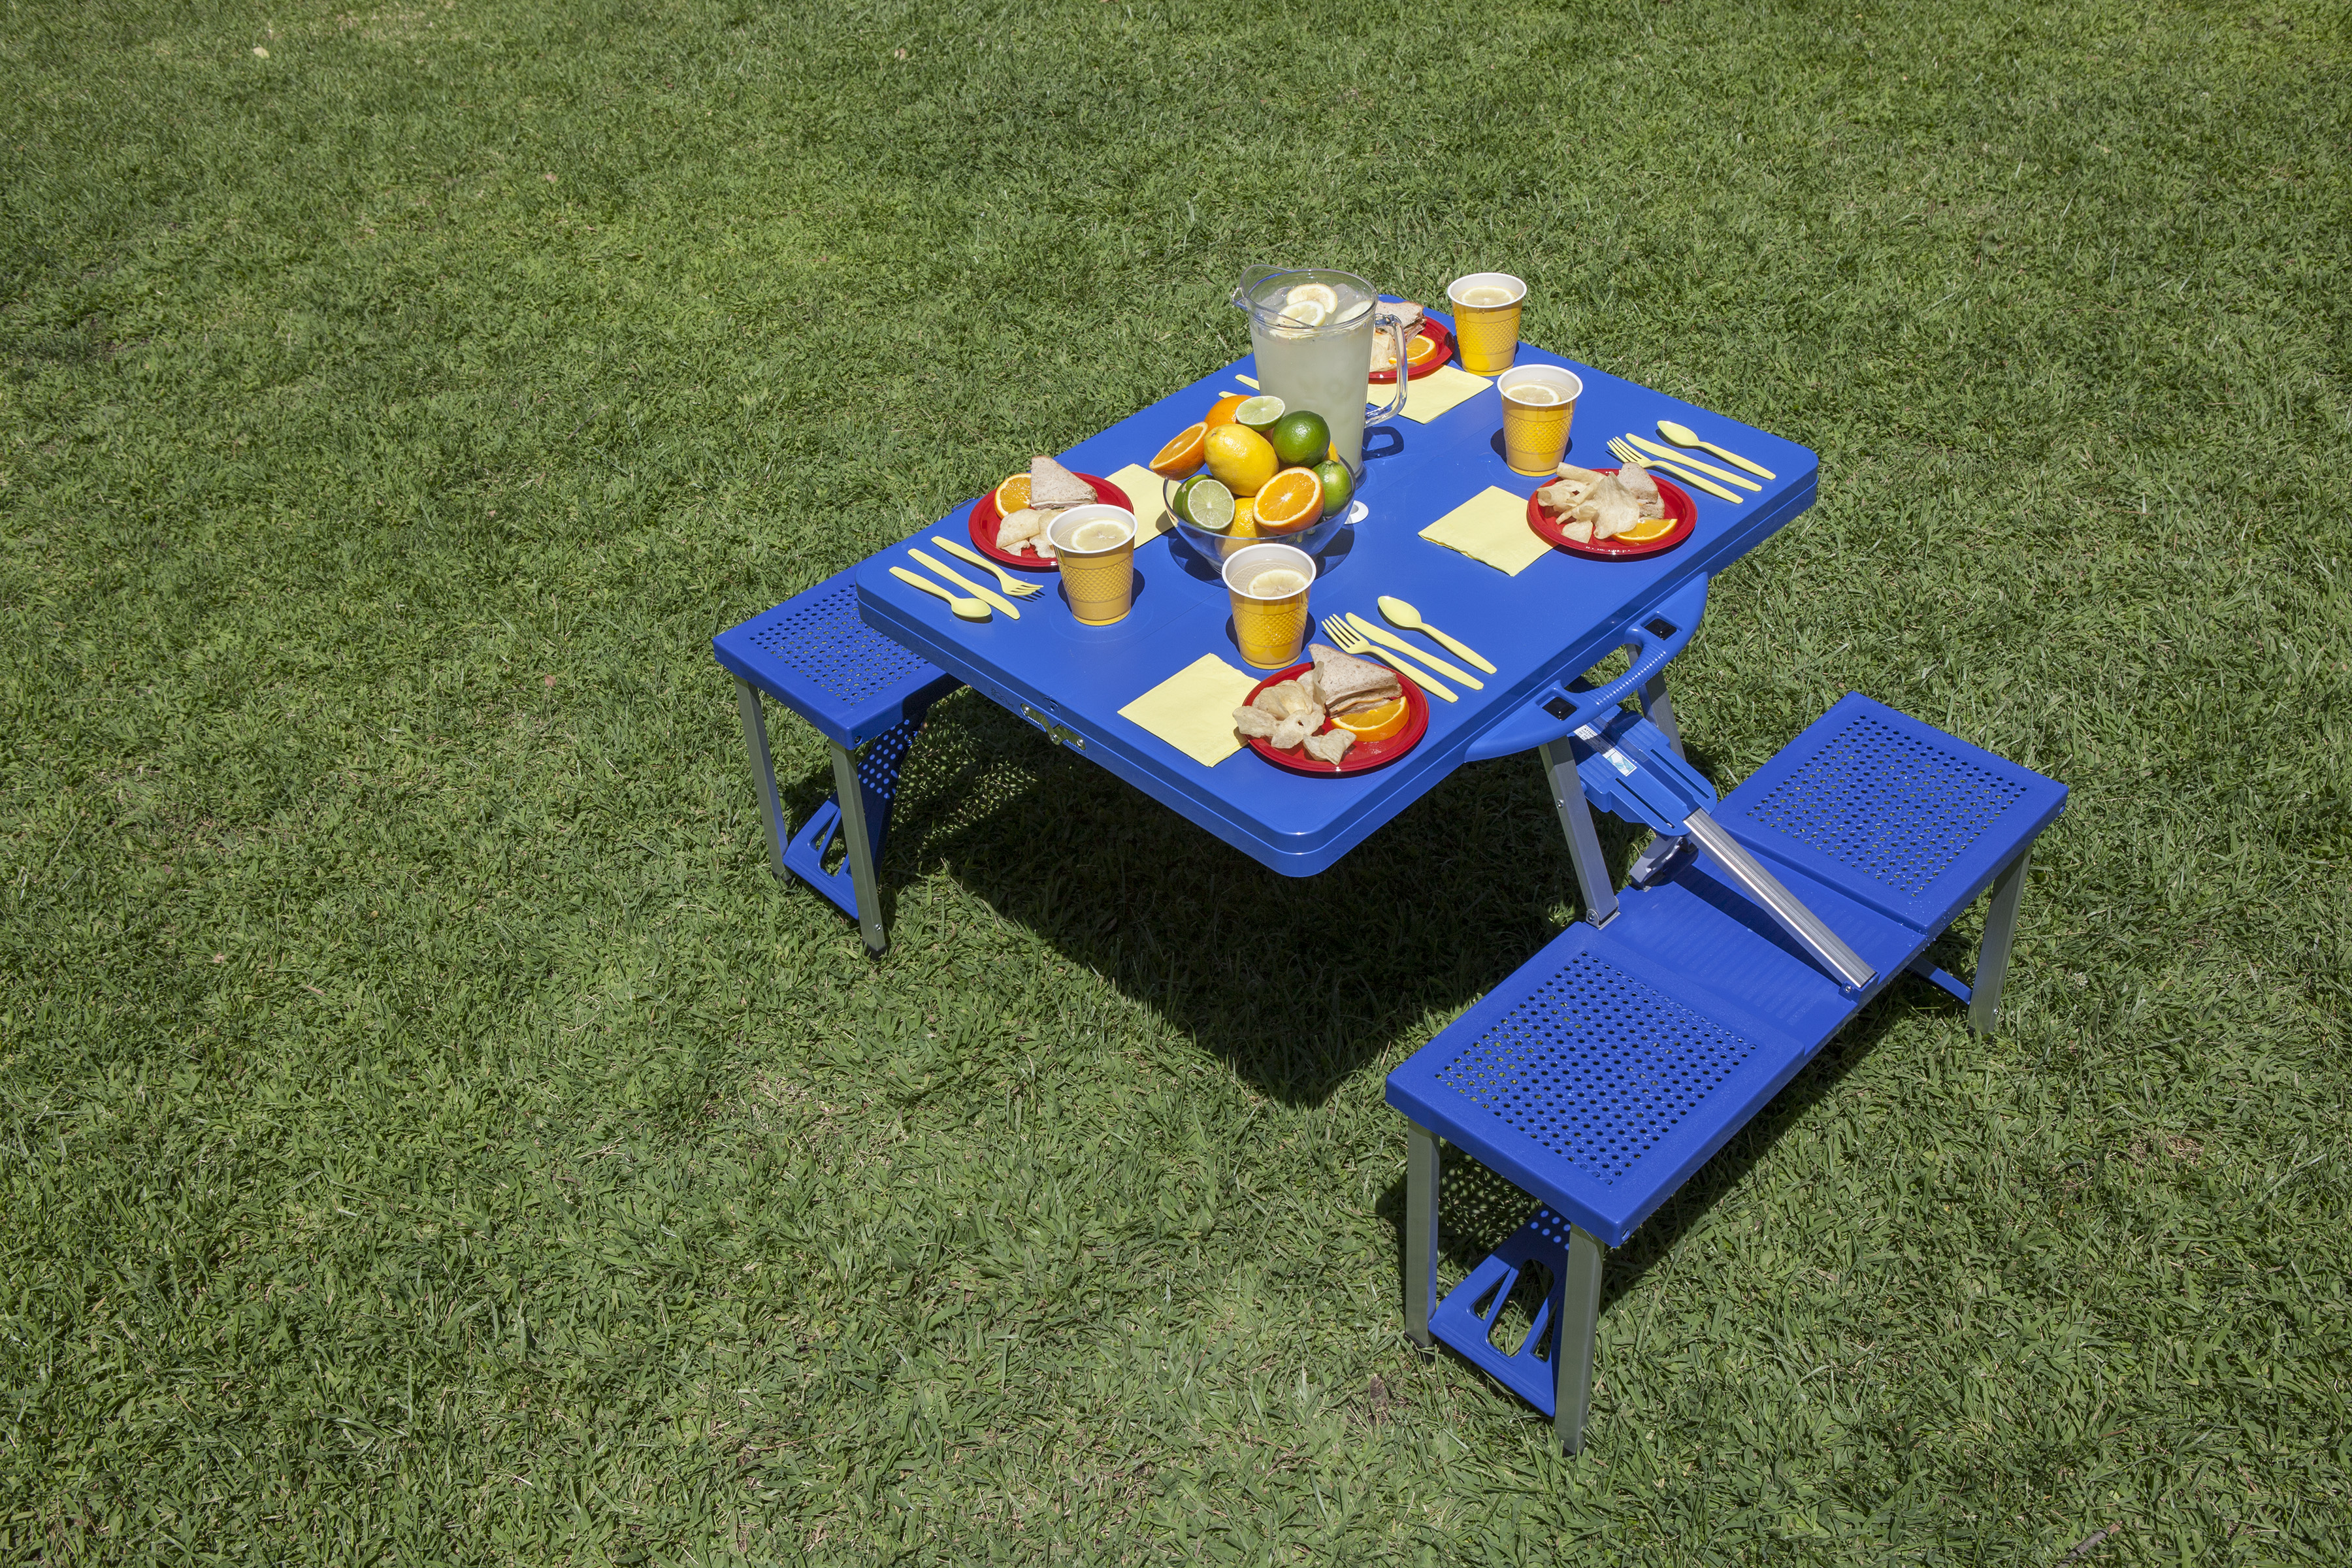 Penn State Nittany Lions Football Field - Picnic Table Portable Folding Table with Seats